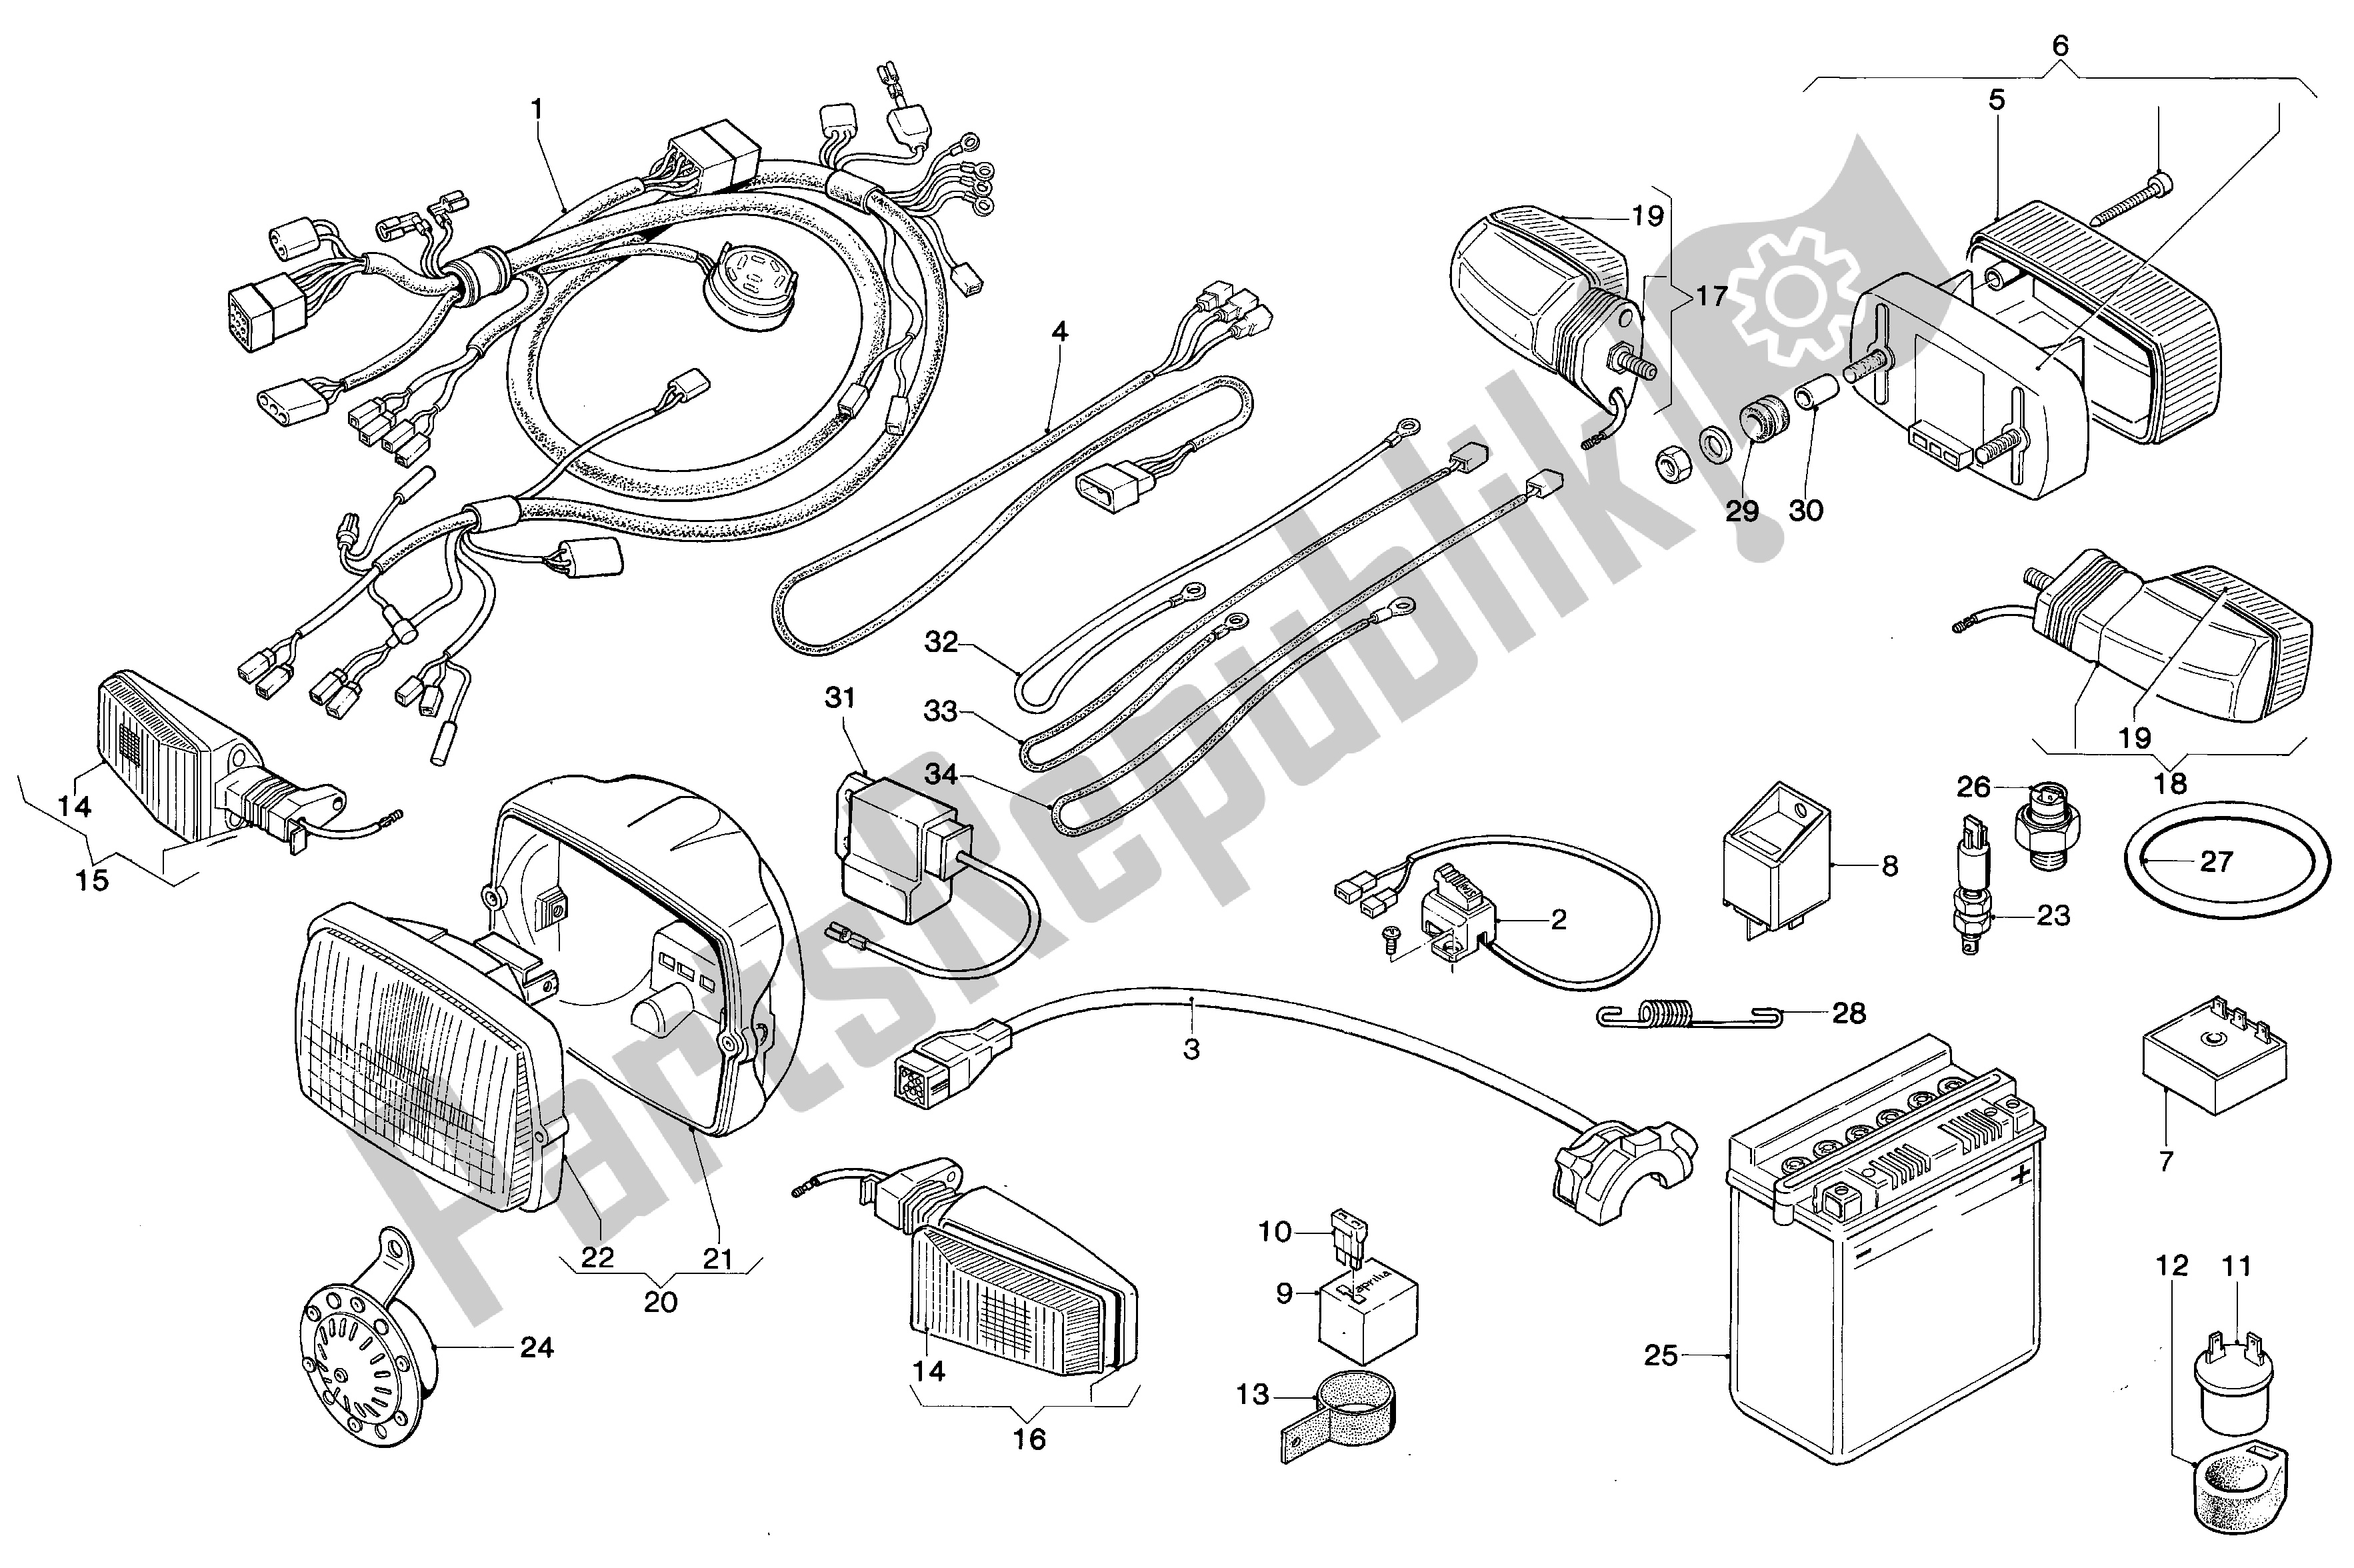 All parts for the Electrical System - Electric Starter of the Aprilia ET 50 1987